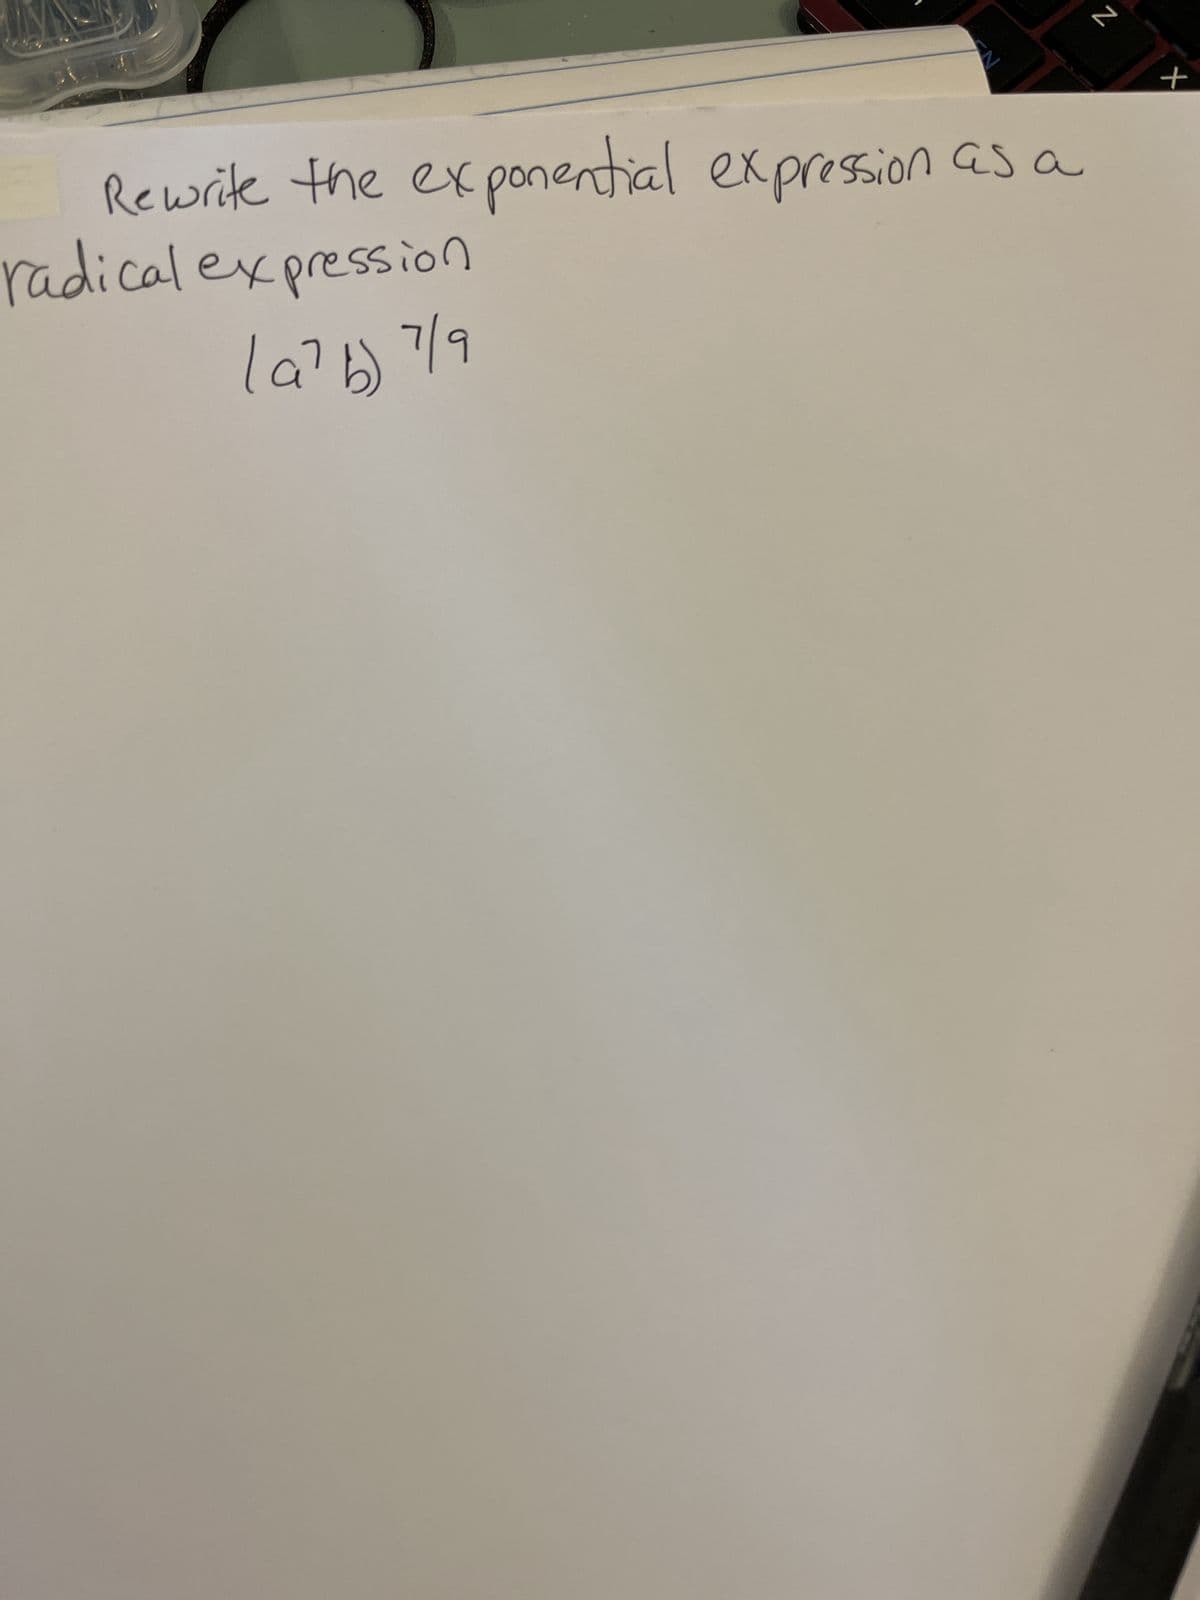 Rewrite the exponential expression as a
radical expression
6/2 (1920)
ww
b)
Z
+